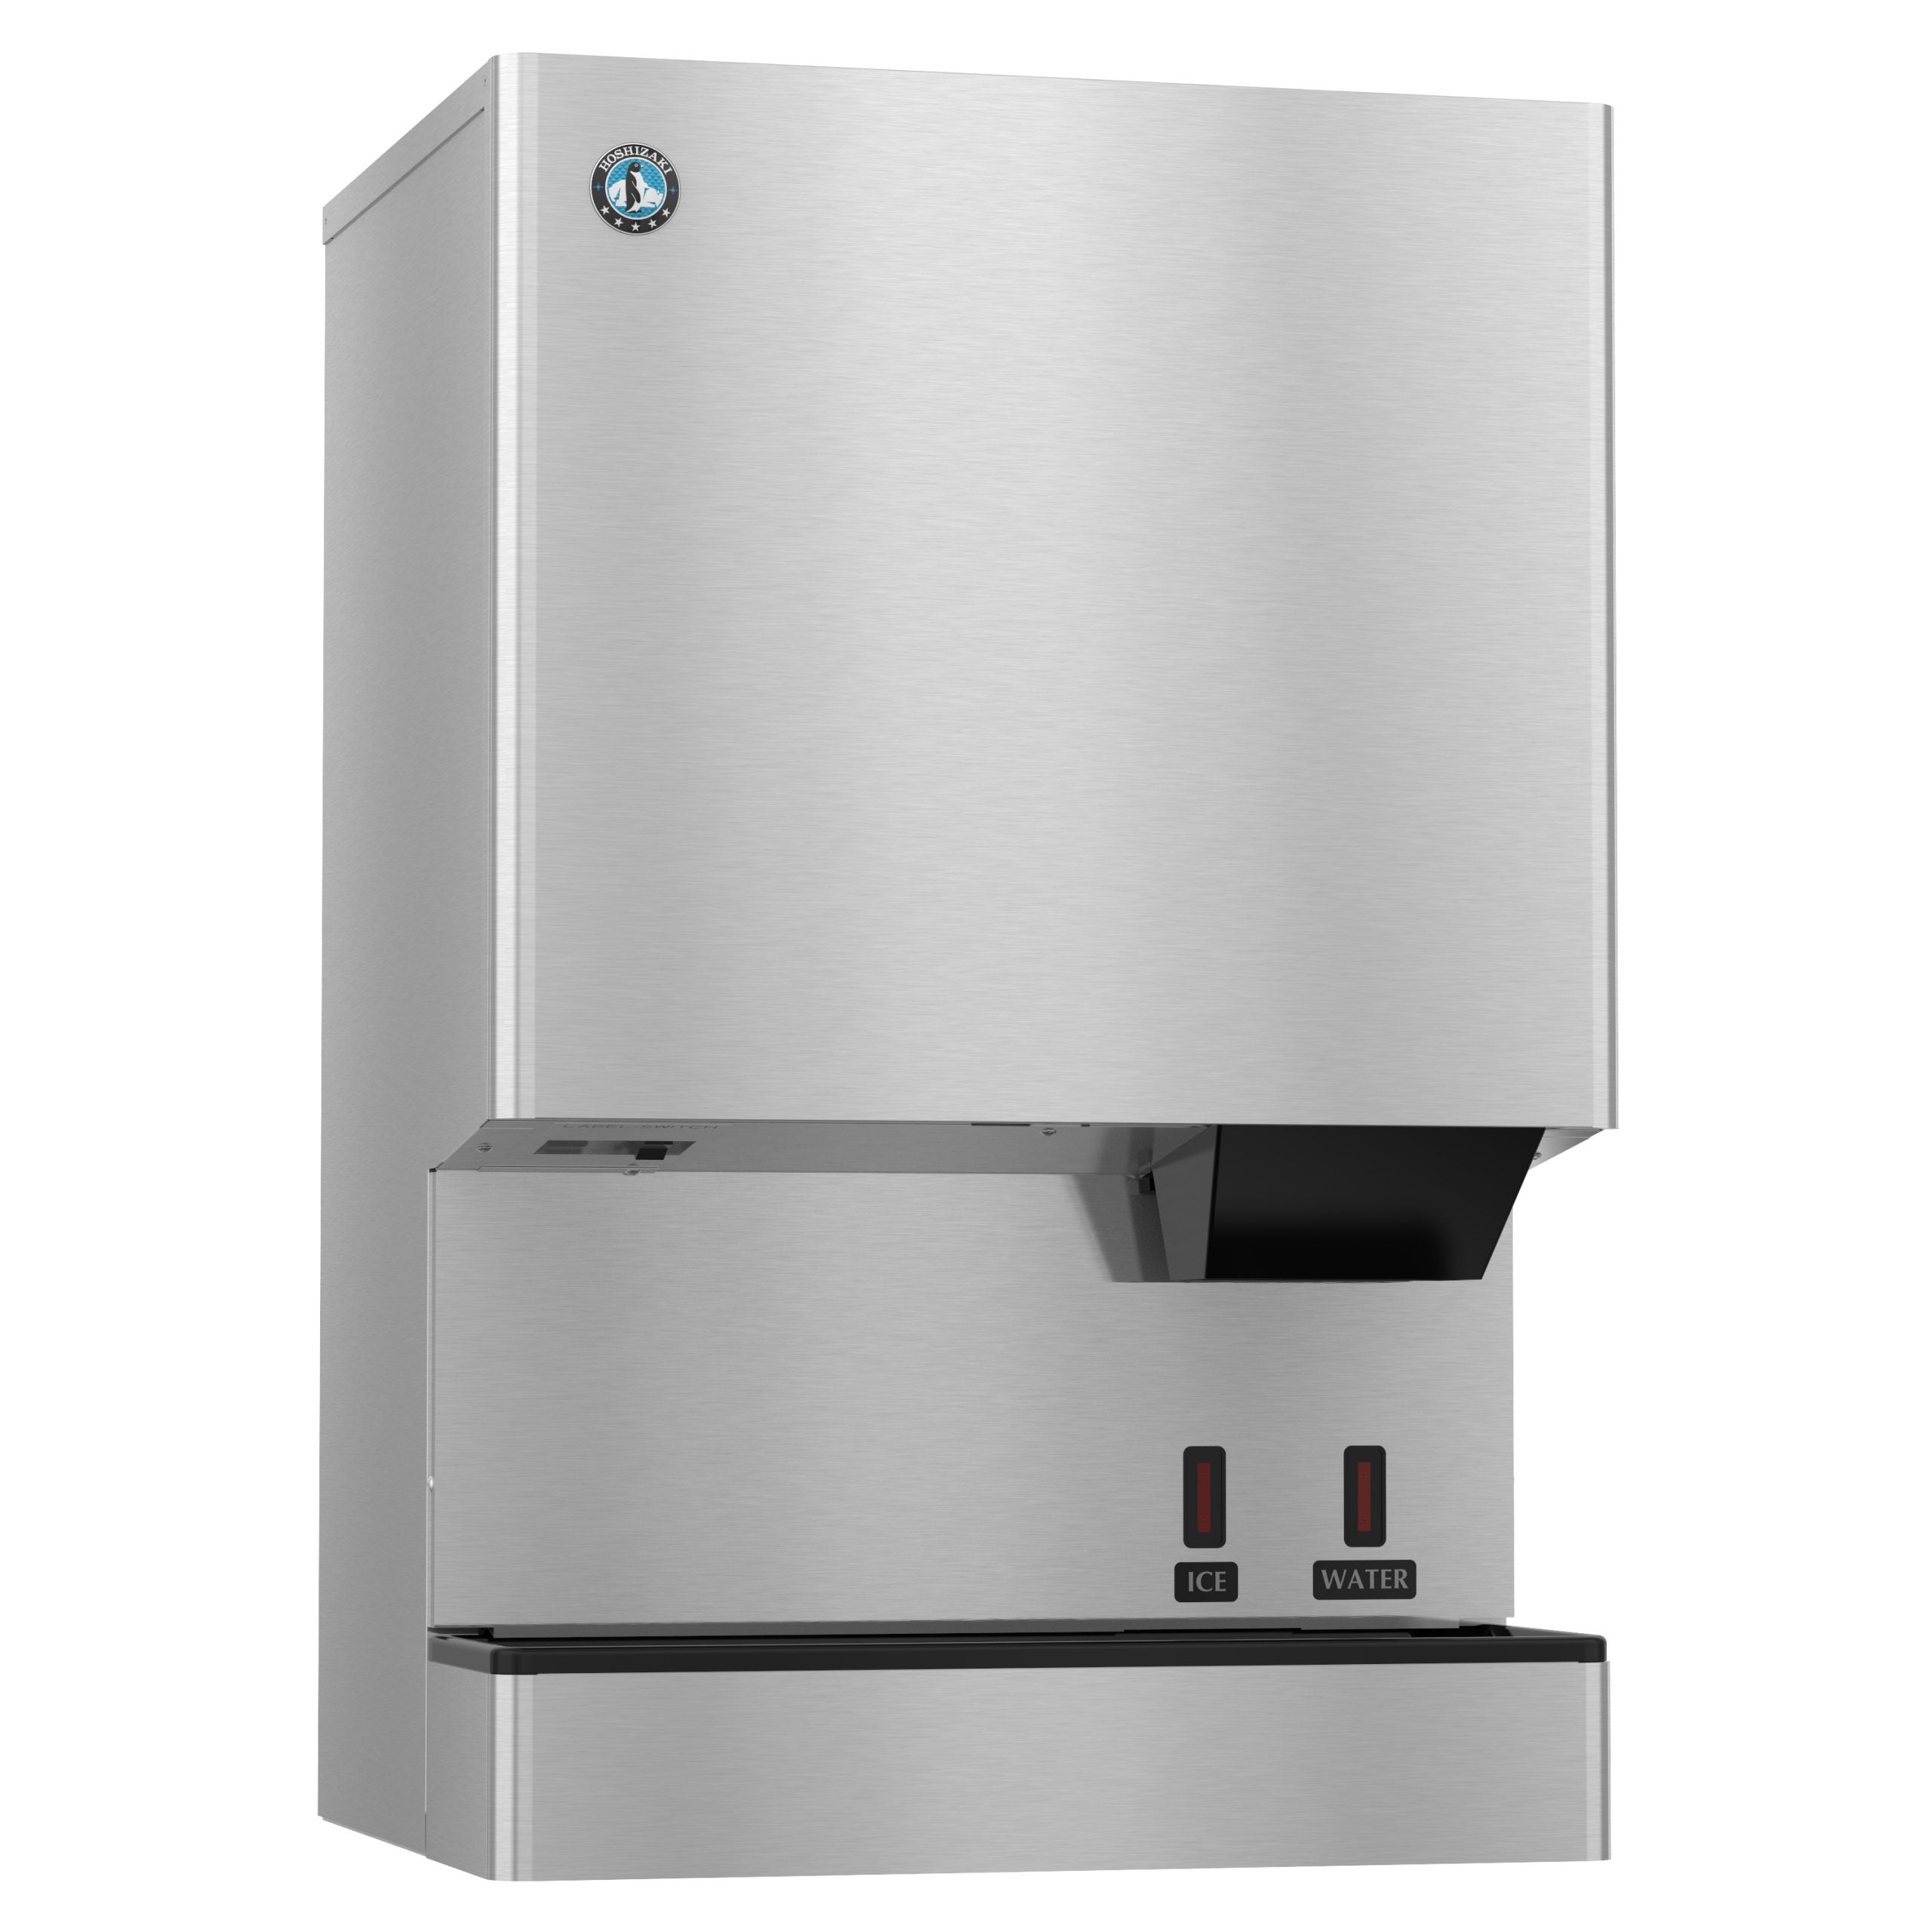 Hoshizaki DCM-500BWH-OS | 26" Wide Hands Free Water-Cooled Small Cubelet Ice & Water Dispenser w/ Built-In Storage Bin